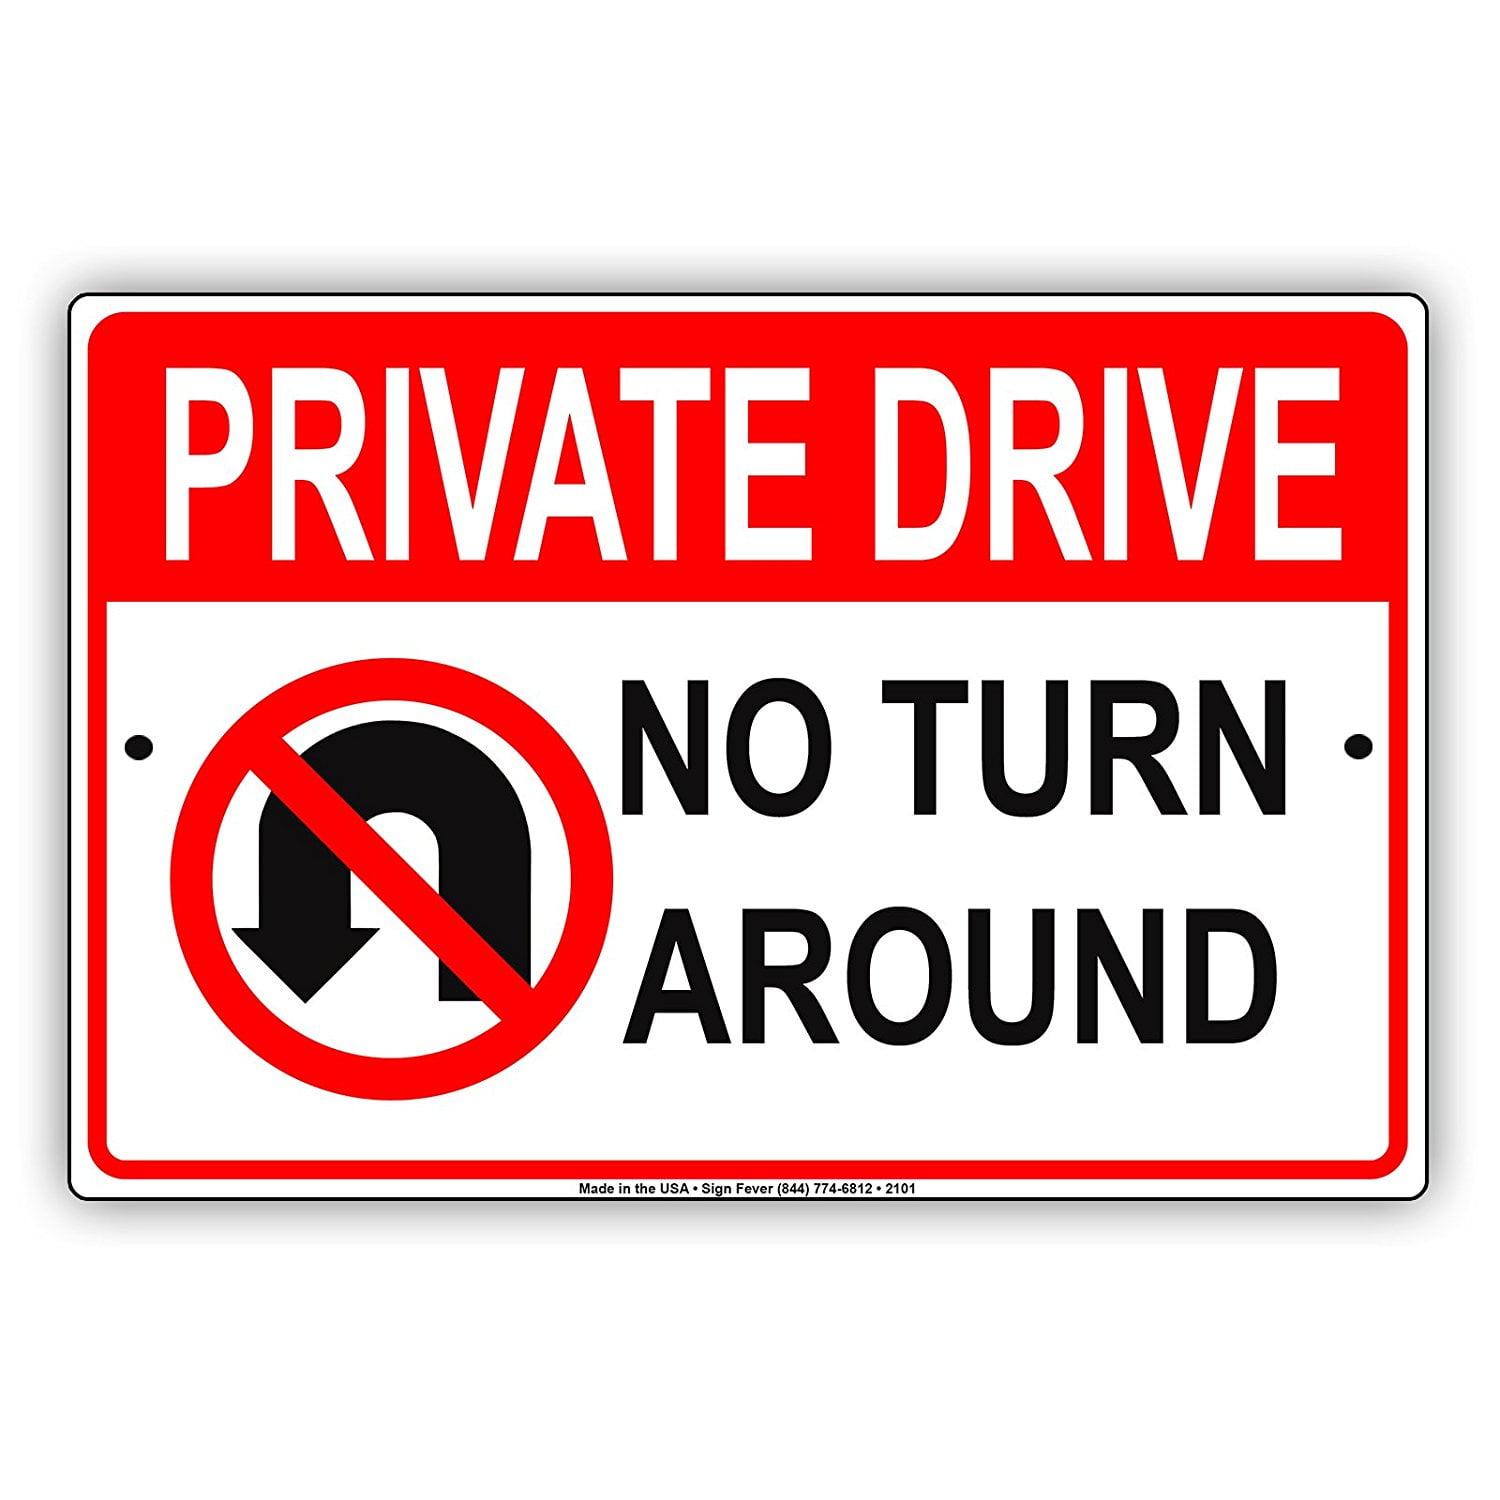 NO Parking Private Driveway Do not OBSTRUCT 8x10" Metal Sign Home Business #115 